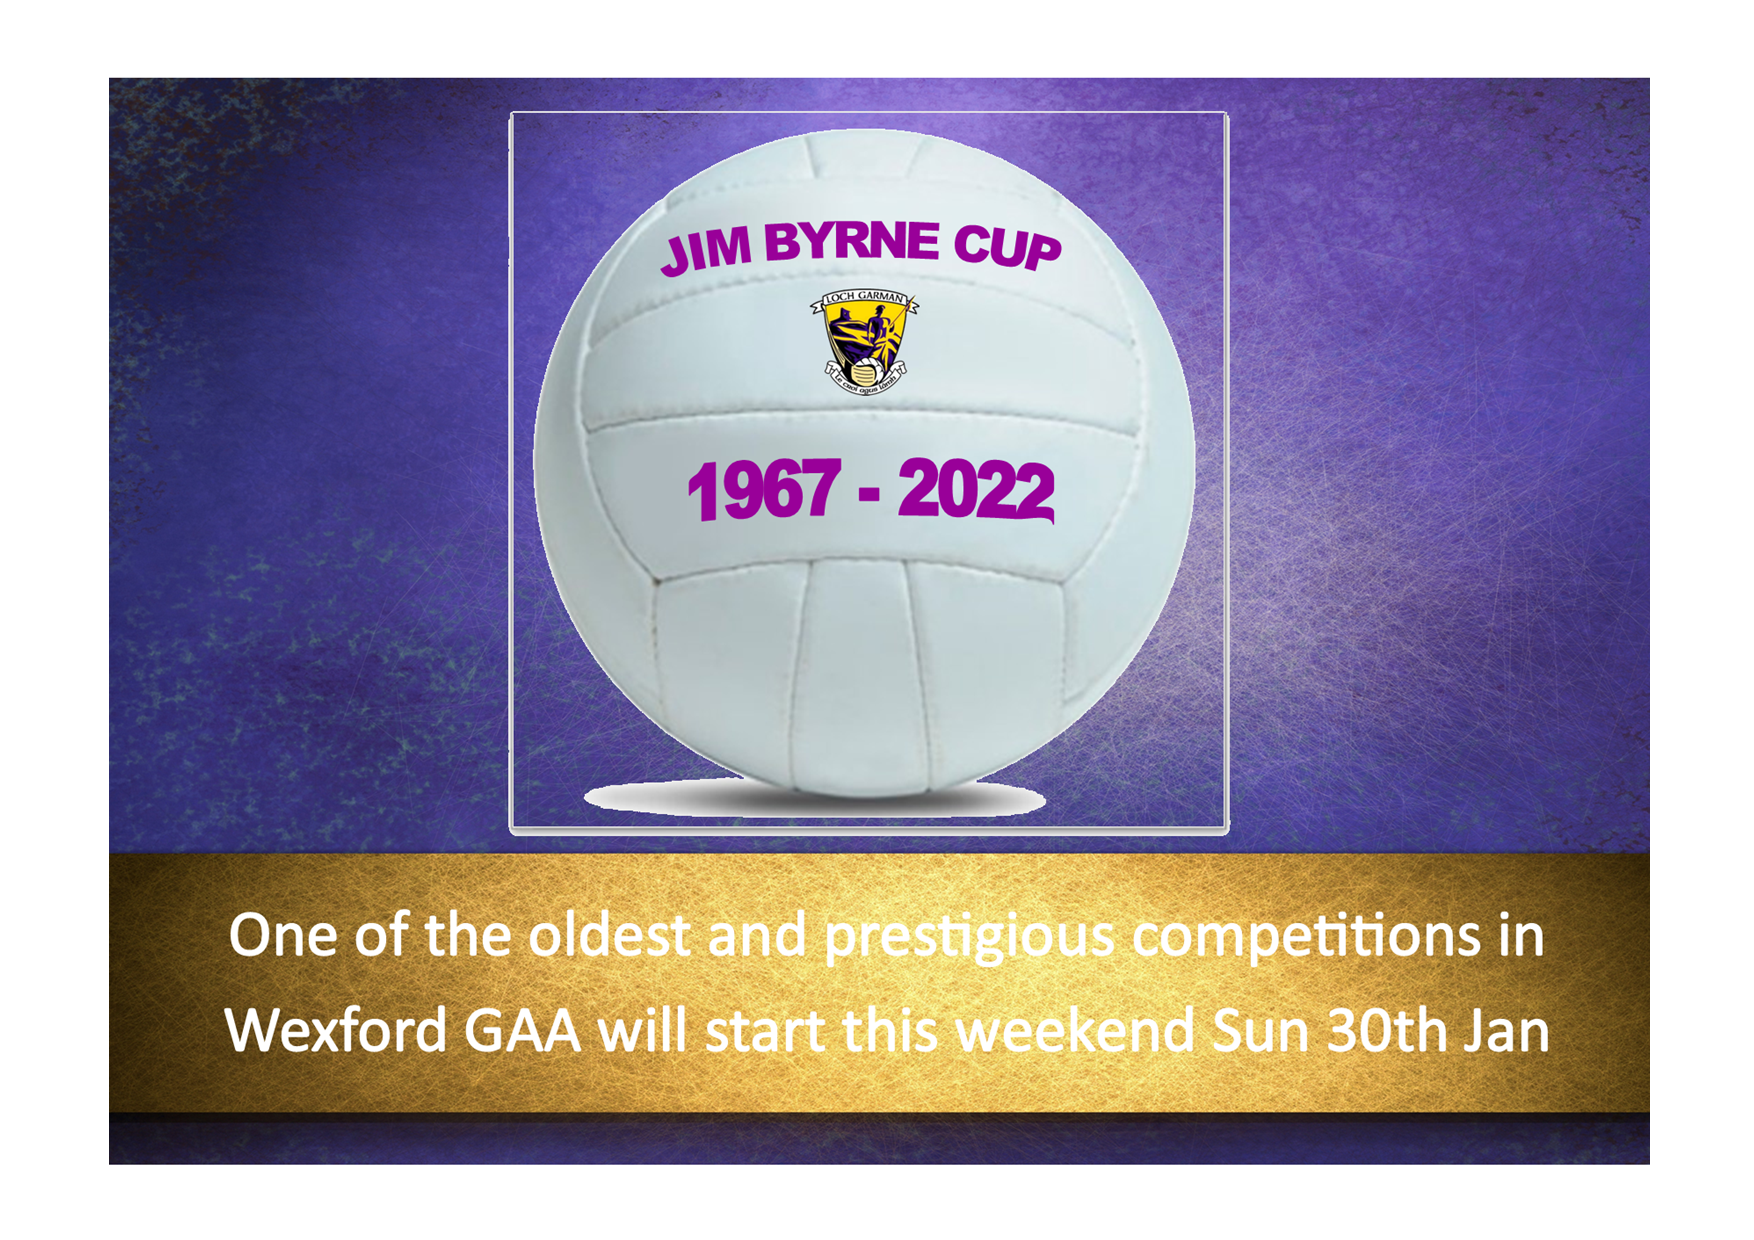 Jim Byrne Cup, one of the oldest and prestigious competitions in Wexford GAA is back this weekend’s. Full list of Weekend’s fixtures Here